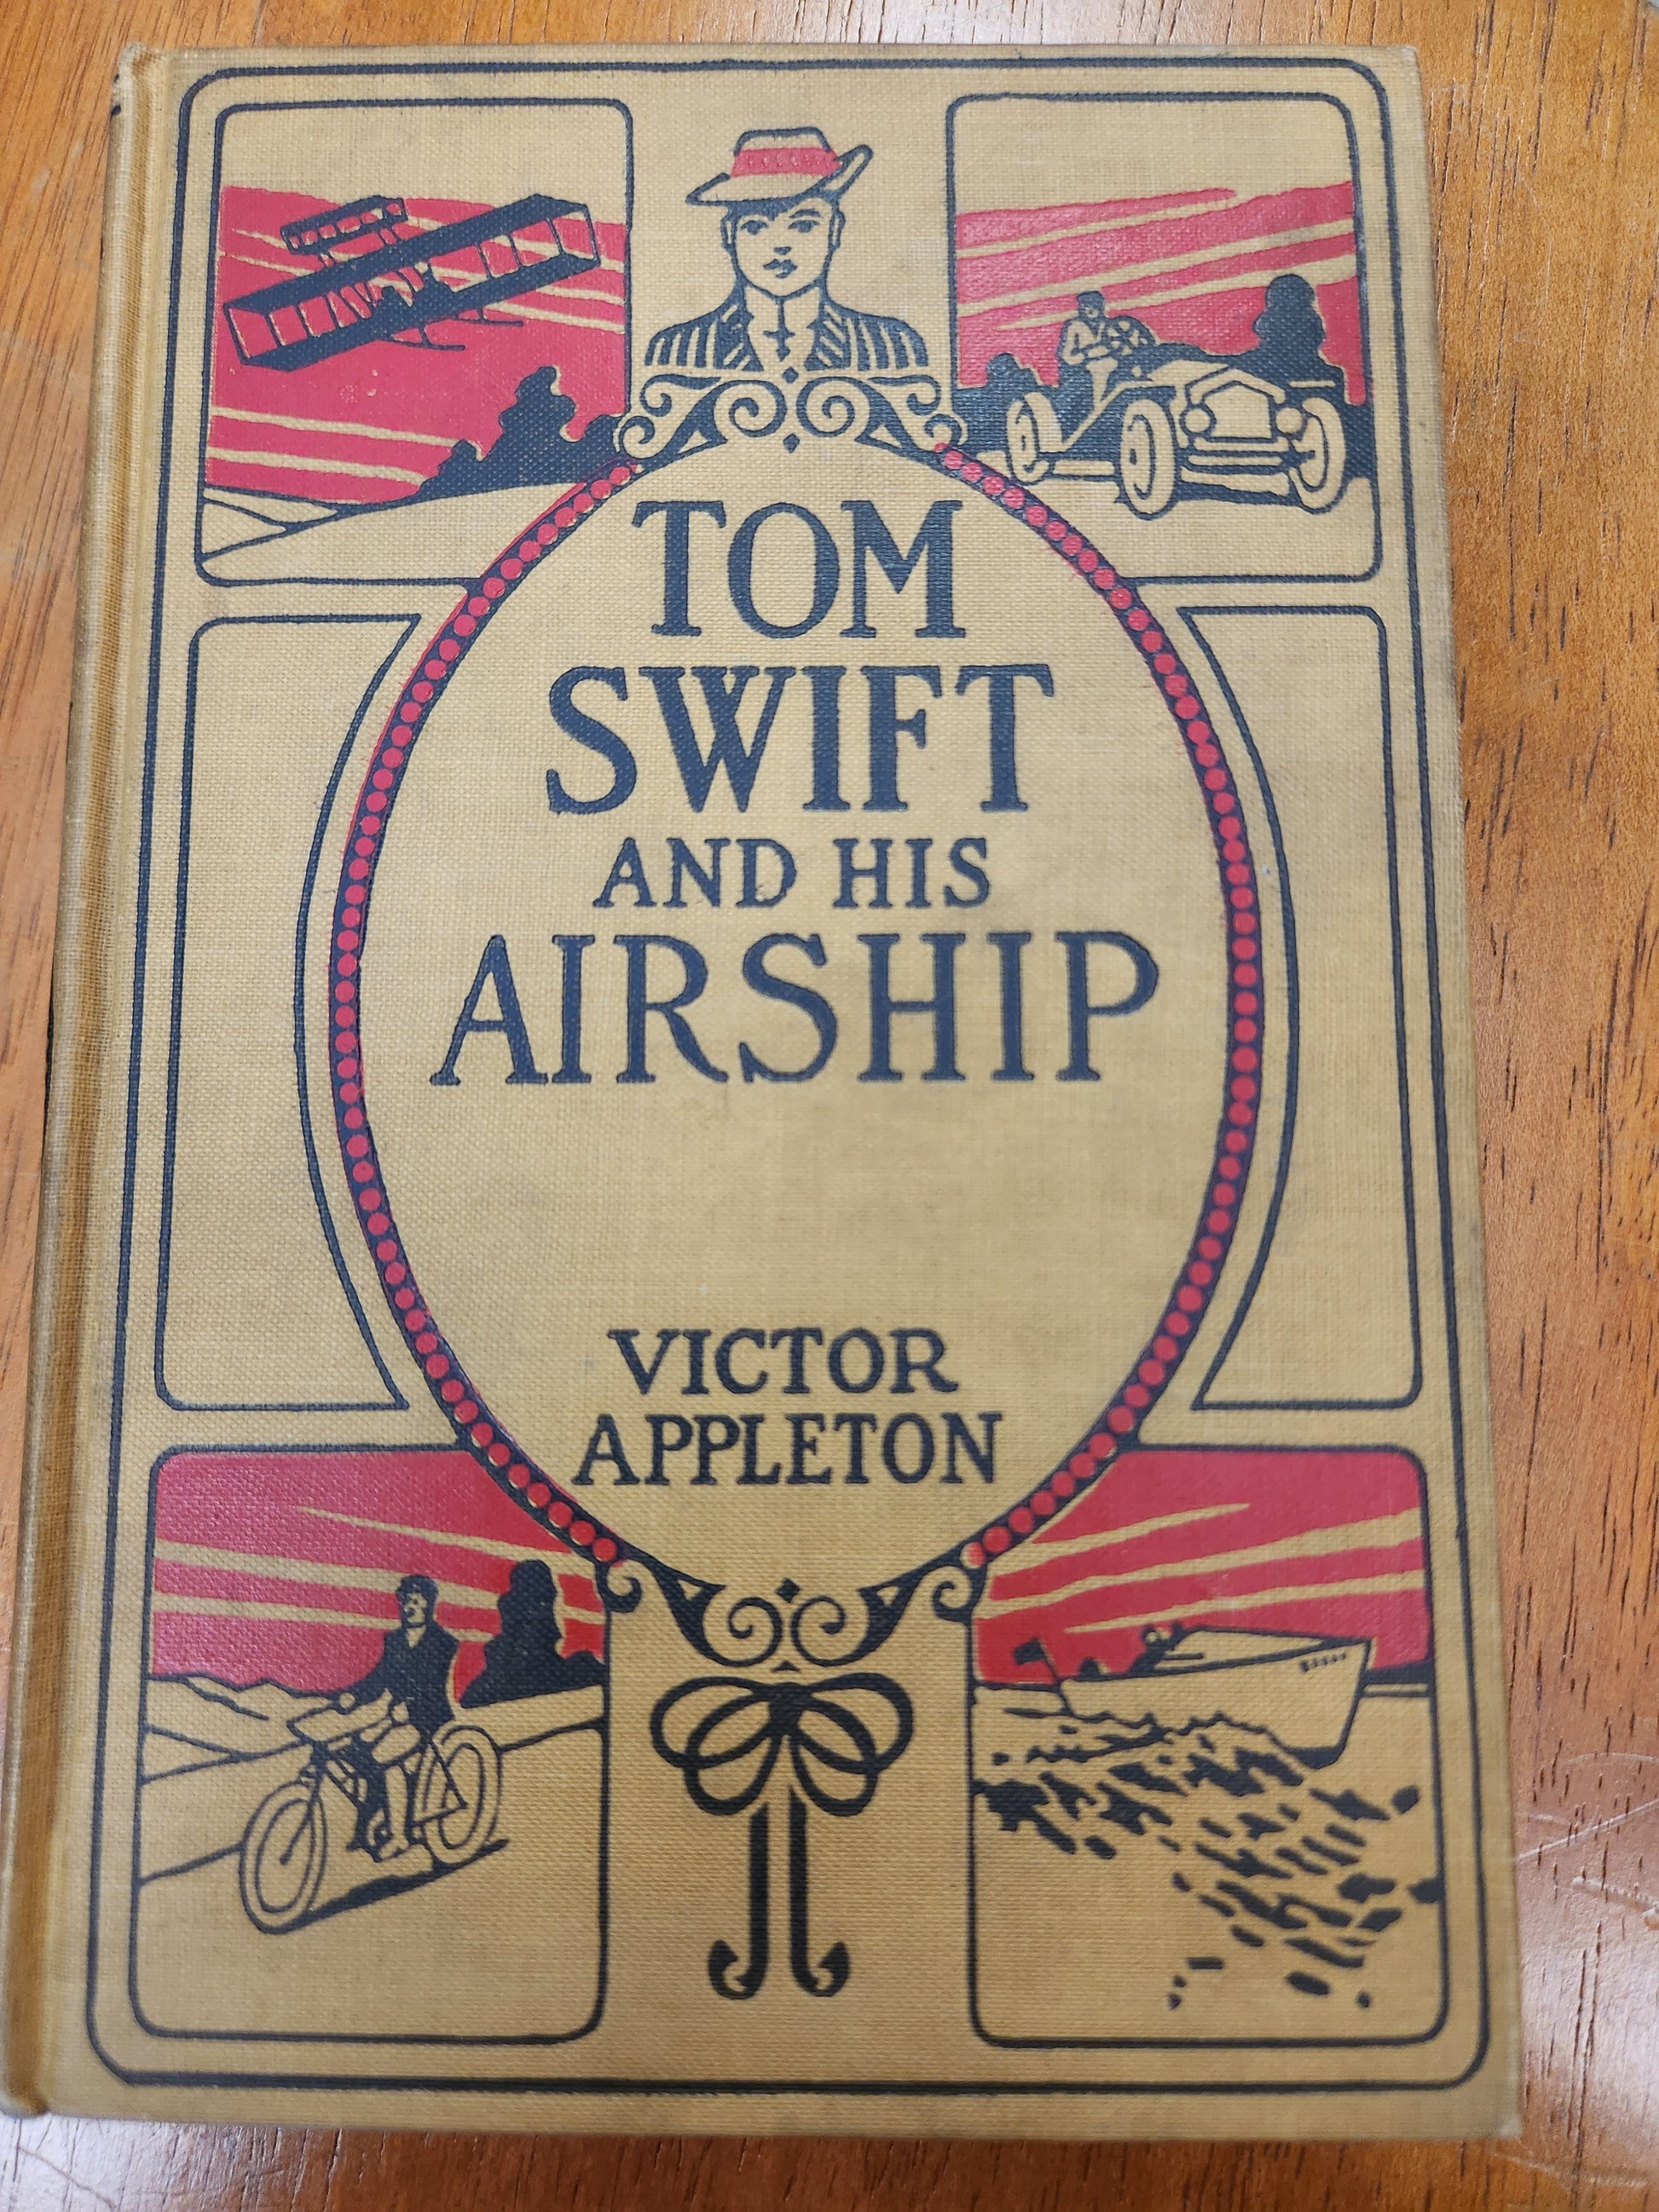 Victor Appleton - Tom Swift and His Airship - Dead Tree Dreams Bookstore